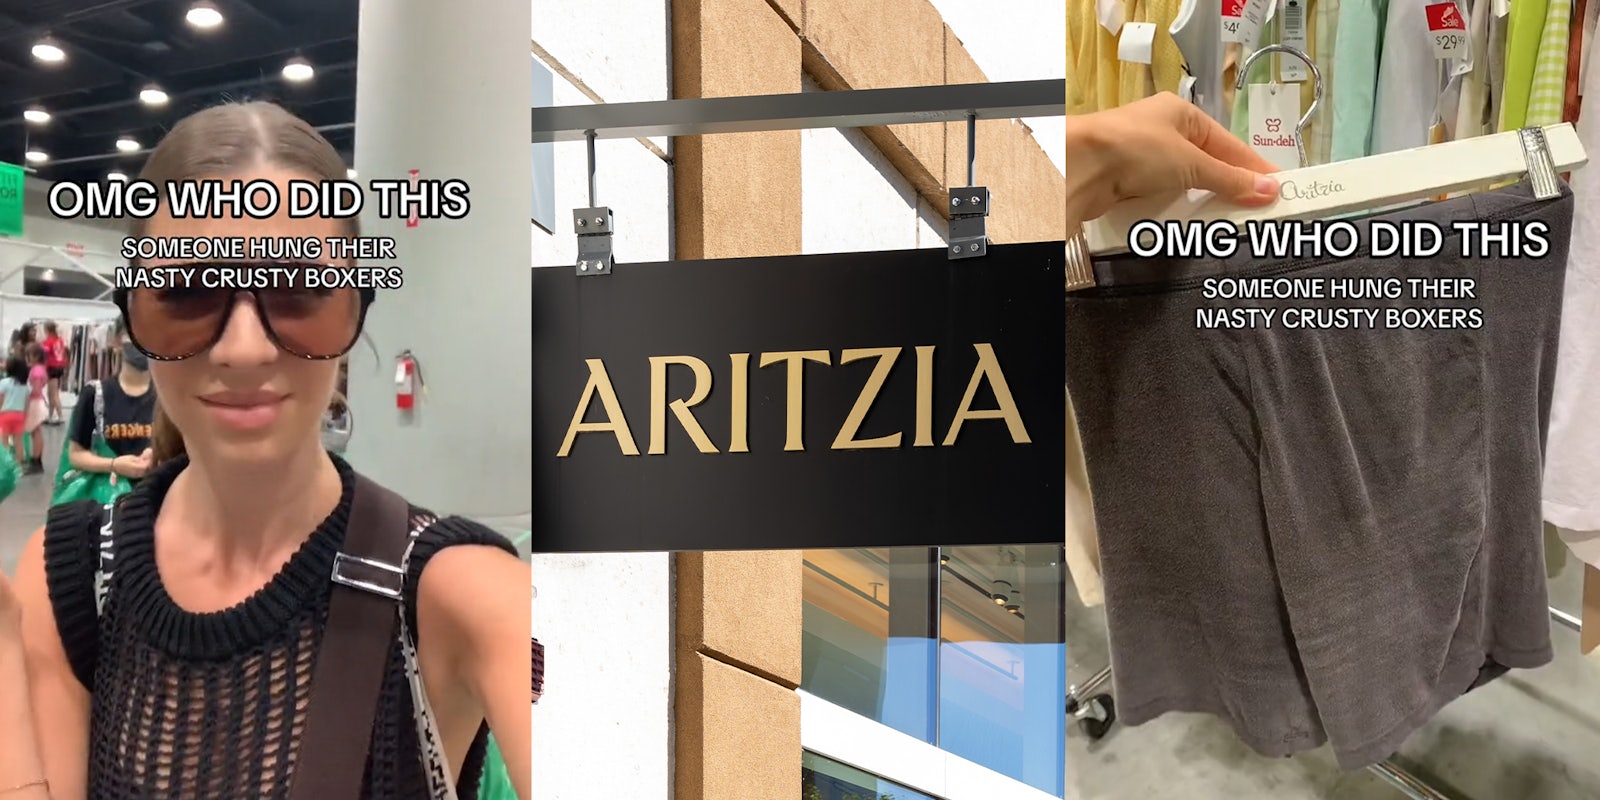 Up to 80% off: Aritzia is holding a huge mysterious sale this week